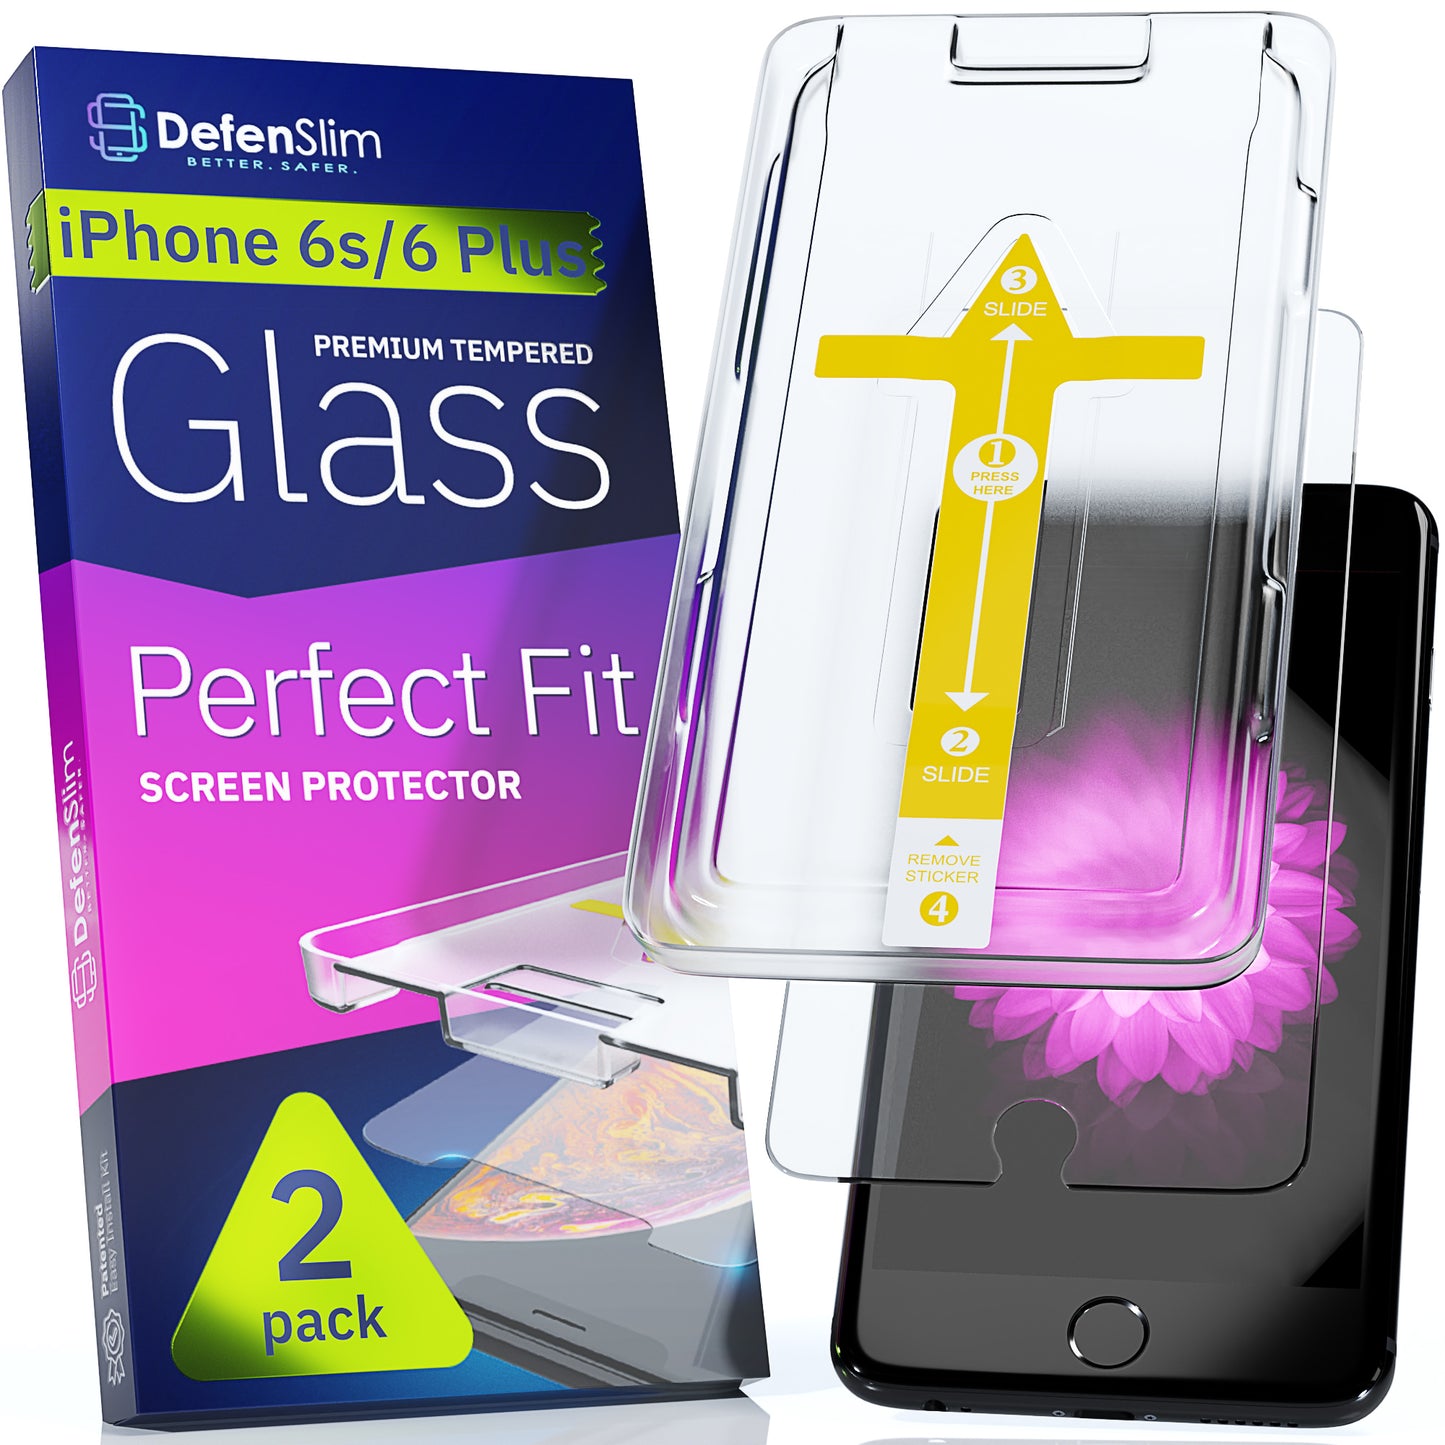 Defenslim iPhone 6s Plus Screen Protector [2-Pack] with Easy Auto-Align Install Kit